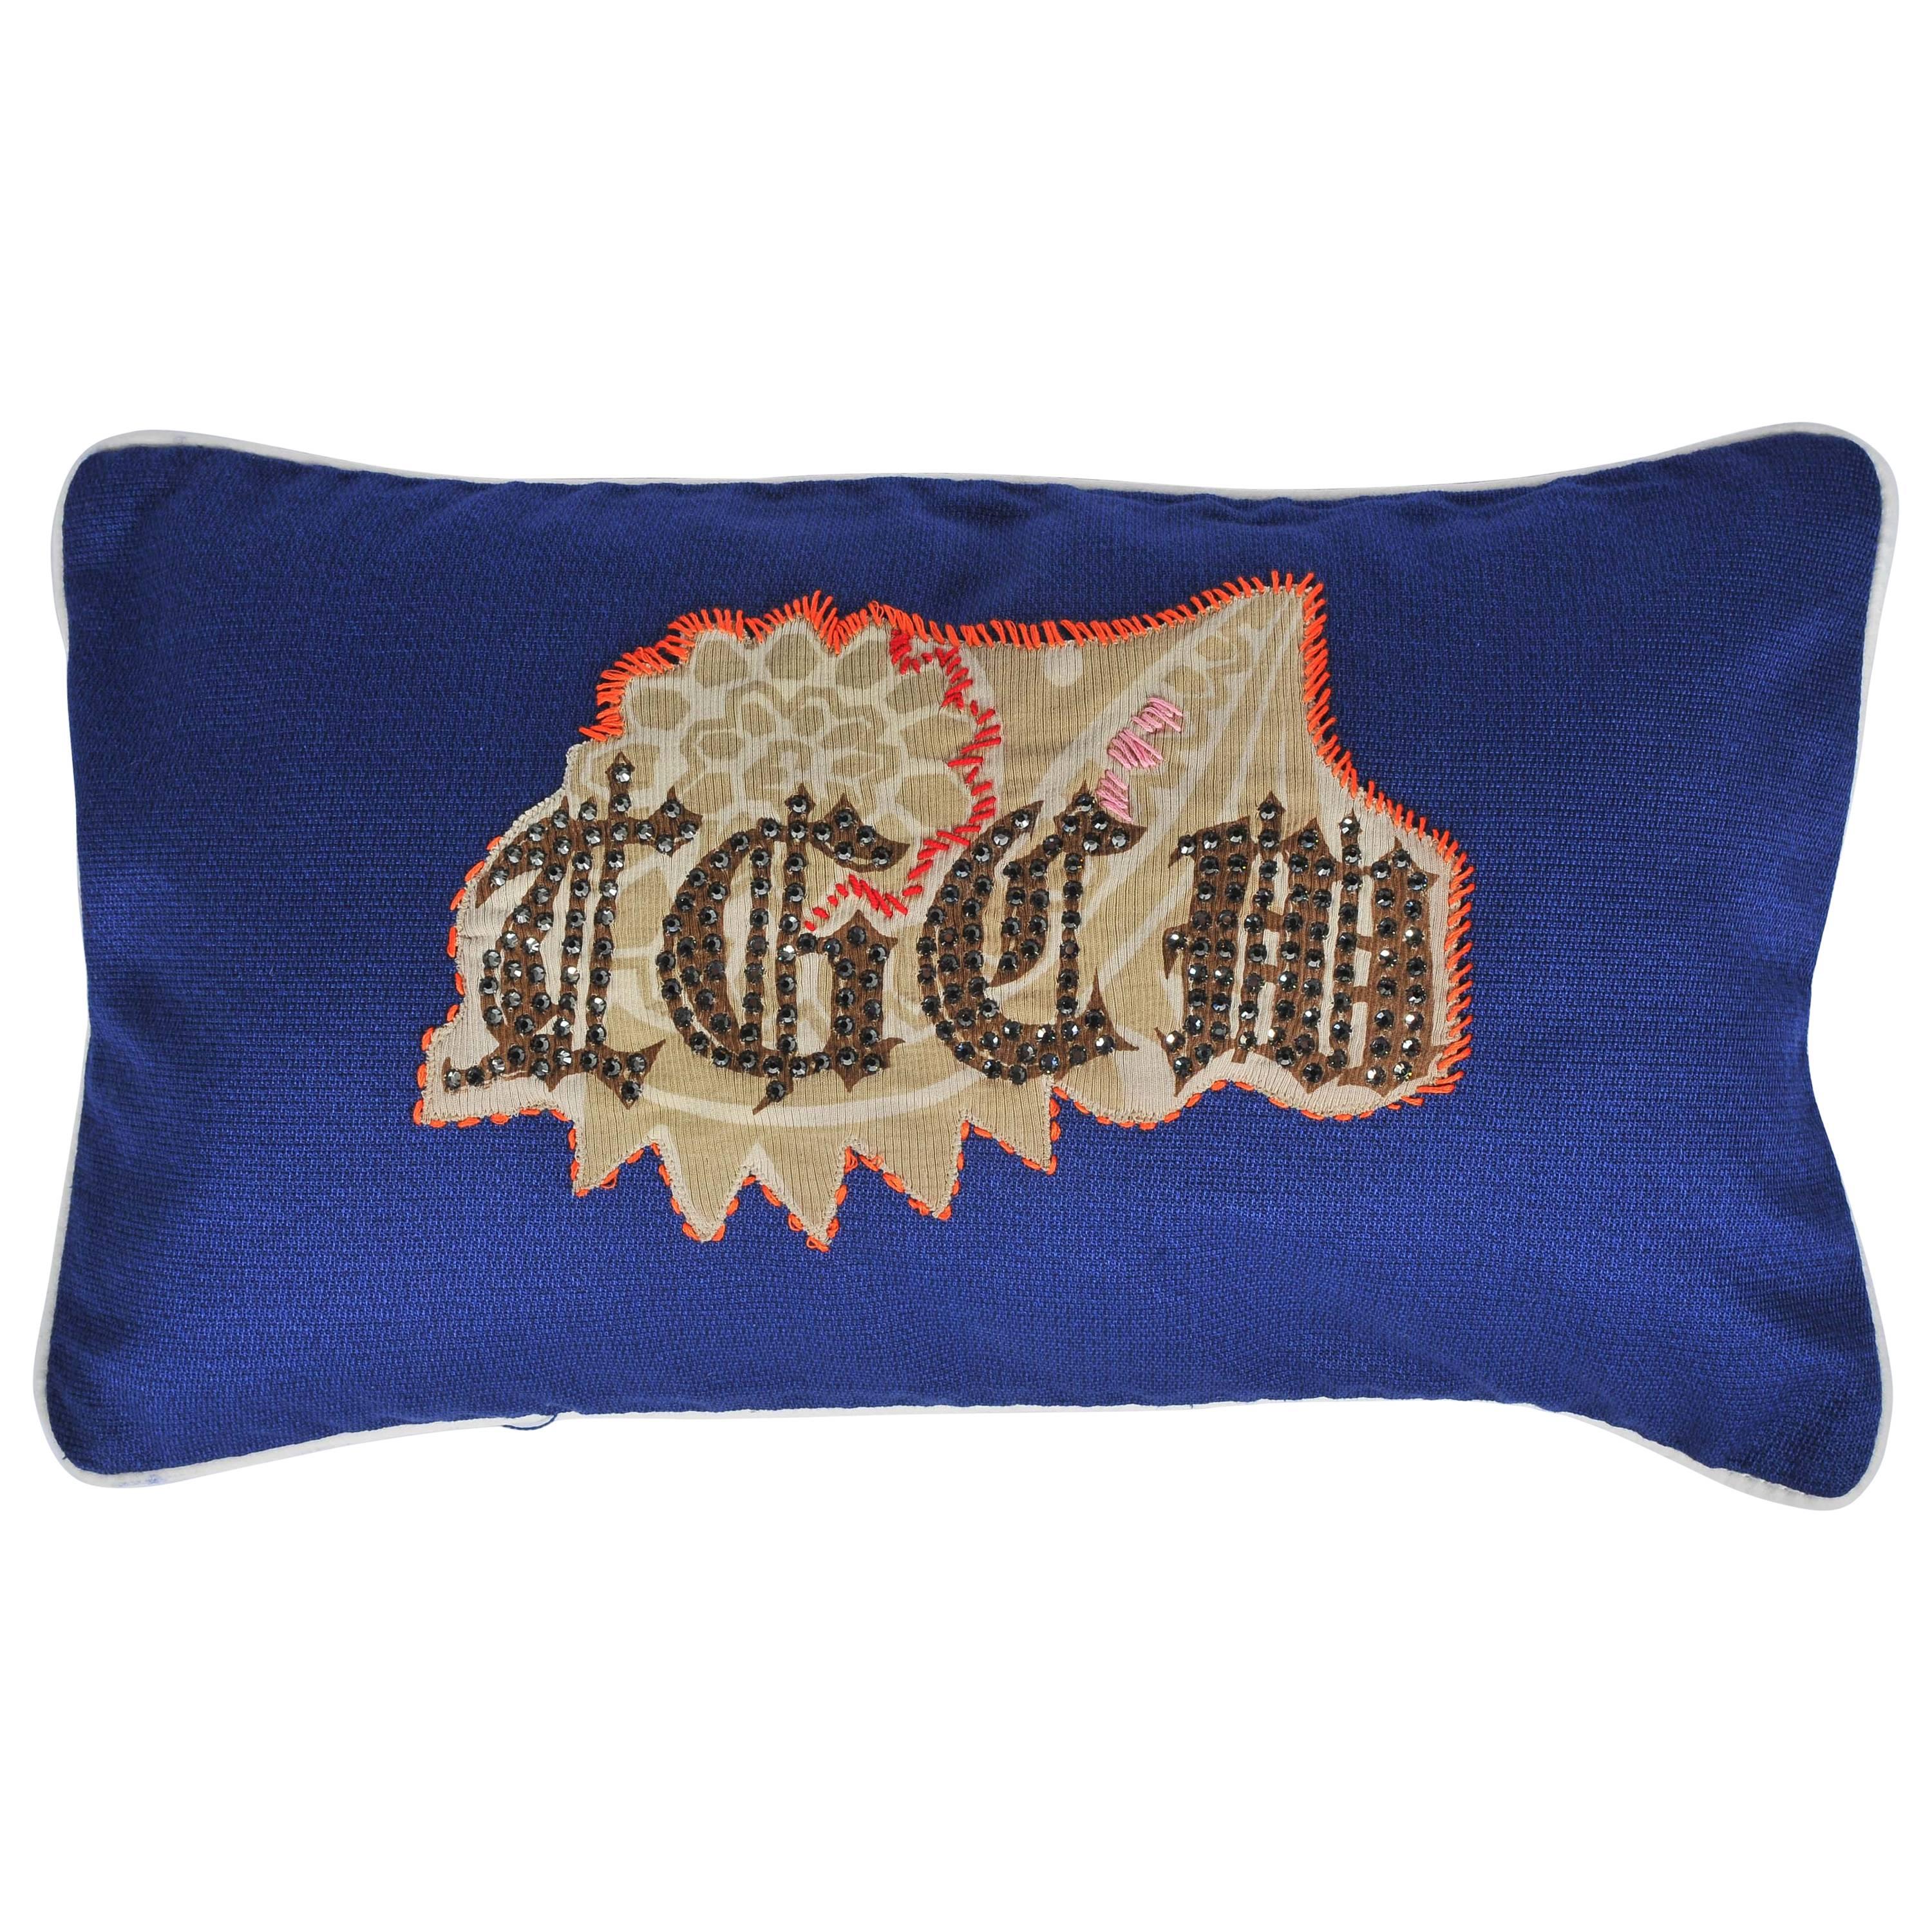 Unique Hndmade Rock and Roll Style Navy Blue Small Cushion For Sale